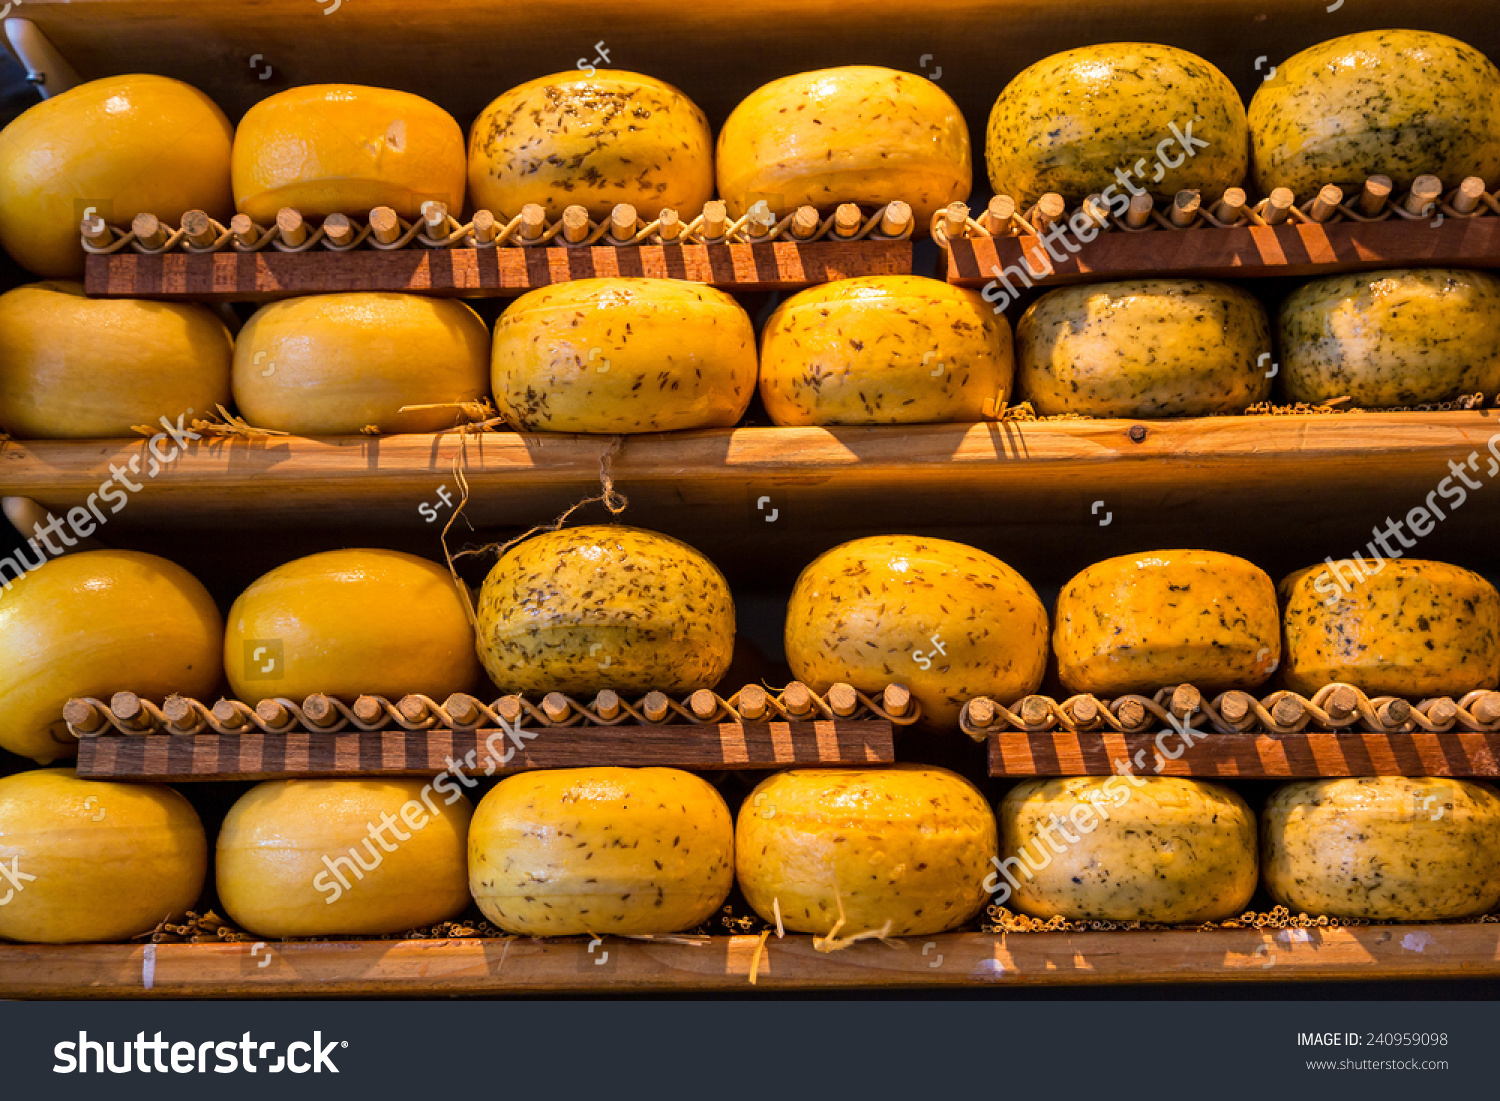 Cheese Wheels On Shelves Amsterdam Store Stock Photo (Edit Now) 240959098